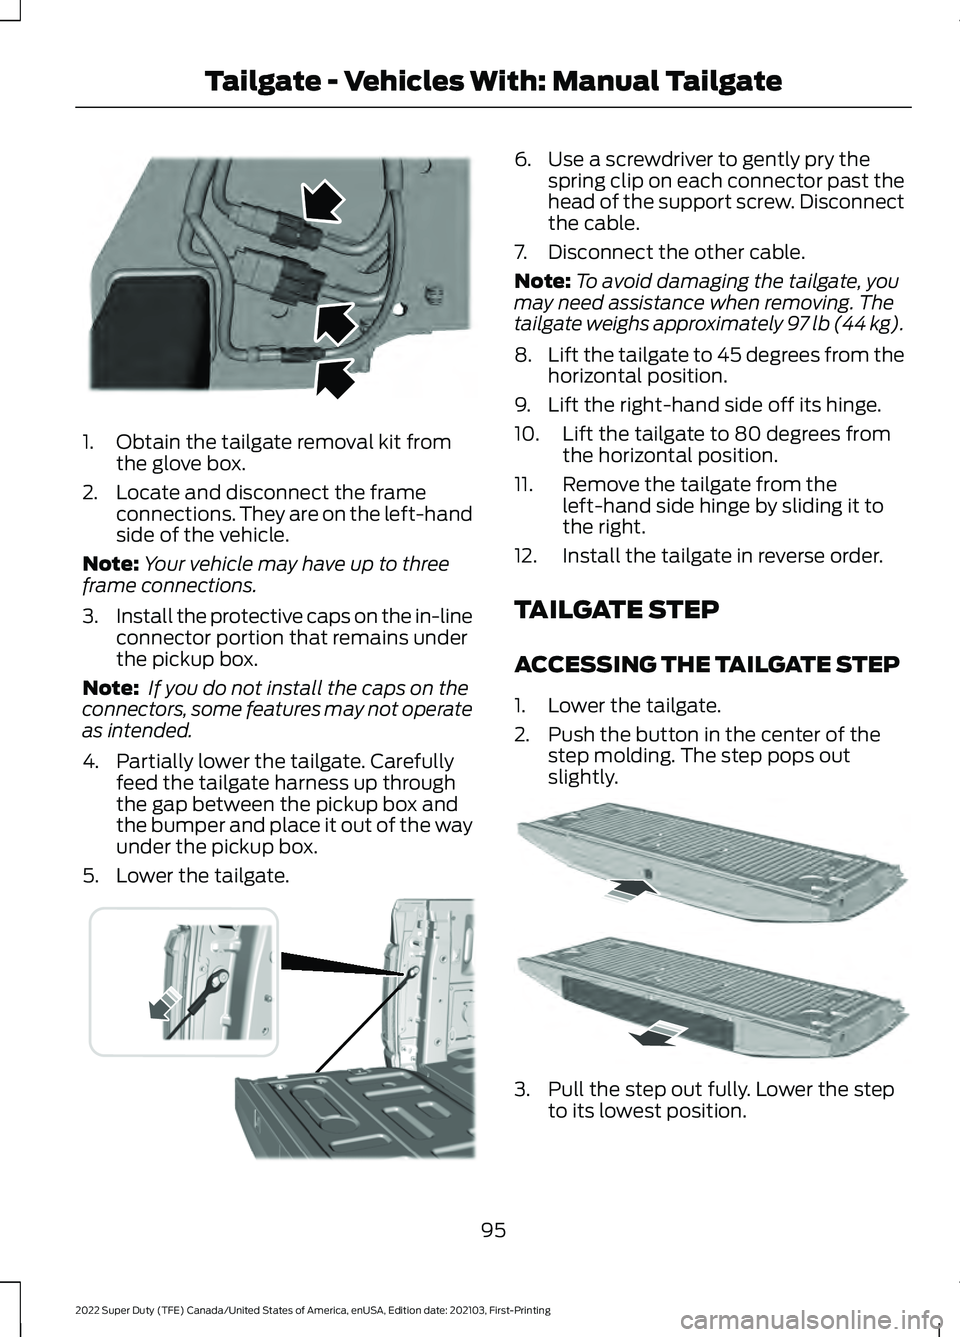 FORD F-350 2022  Owners Manual 1. Obtain the tailgate removal kit from
the glove box.
2. Locate and disconnect the frame connections. They are on the left-hand
side of the vehicle.
Note: Your vehicle may have up to three
frame conn